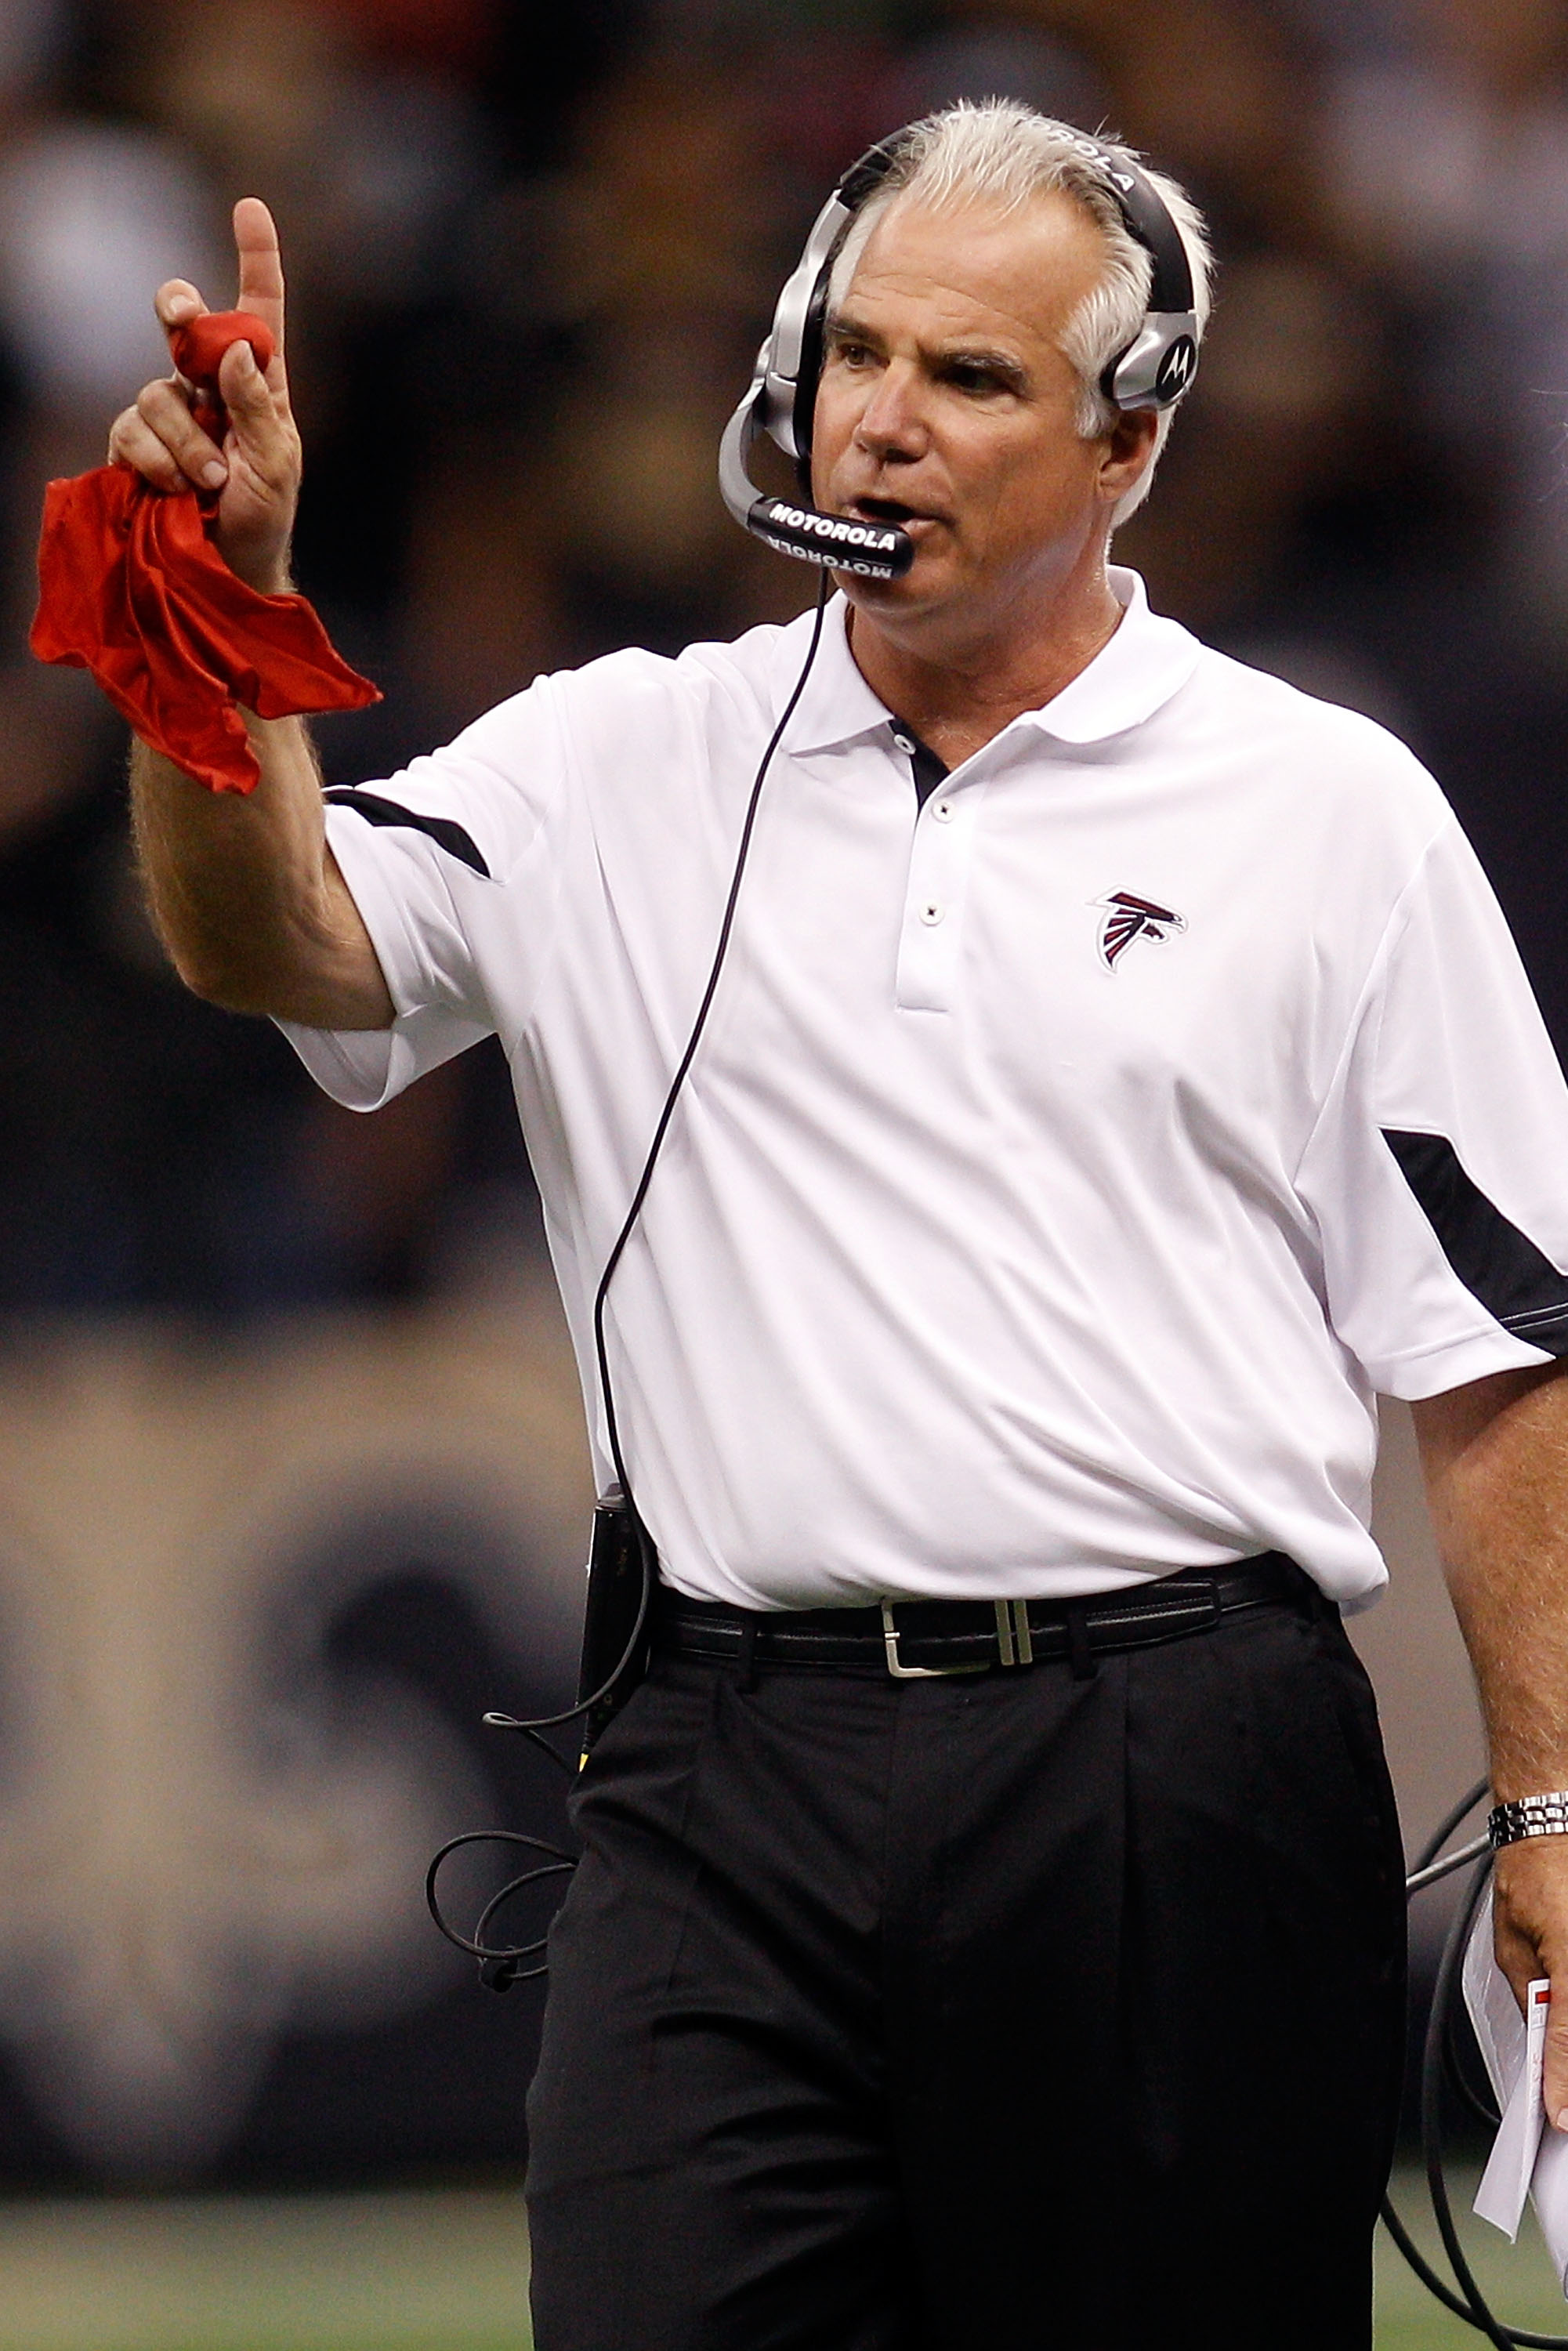 NEW ORLEANS - SEPTEMBER 26:  Head coach Mike Smith of the Atlanta Falcons throws out the red challenge flag during the game against the New Orleans Saints at the Louisiana Superdome on September 26, 2010 in New Orleans, Louisiana. The Falcons defeated the